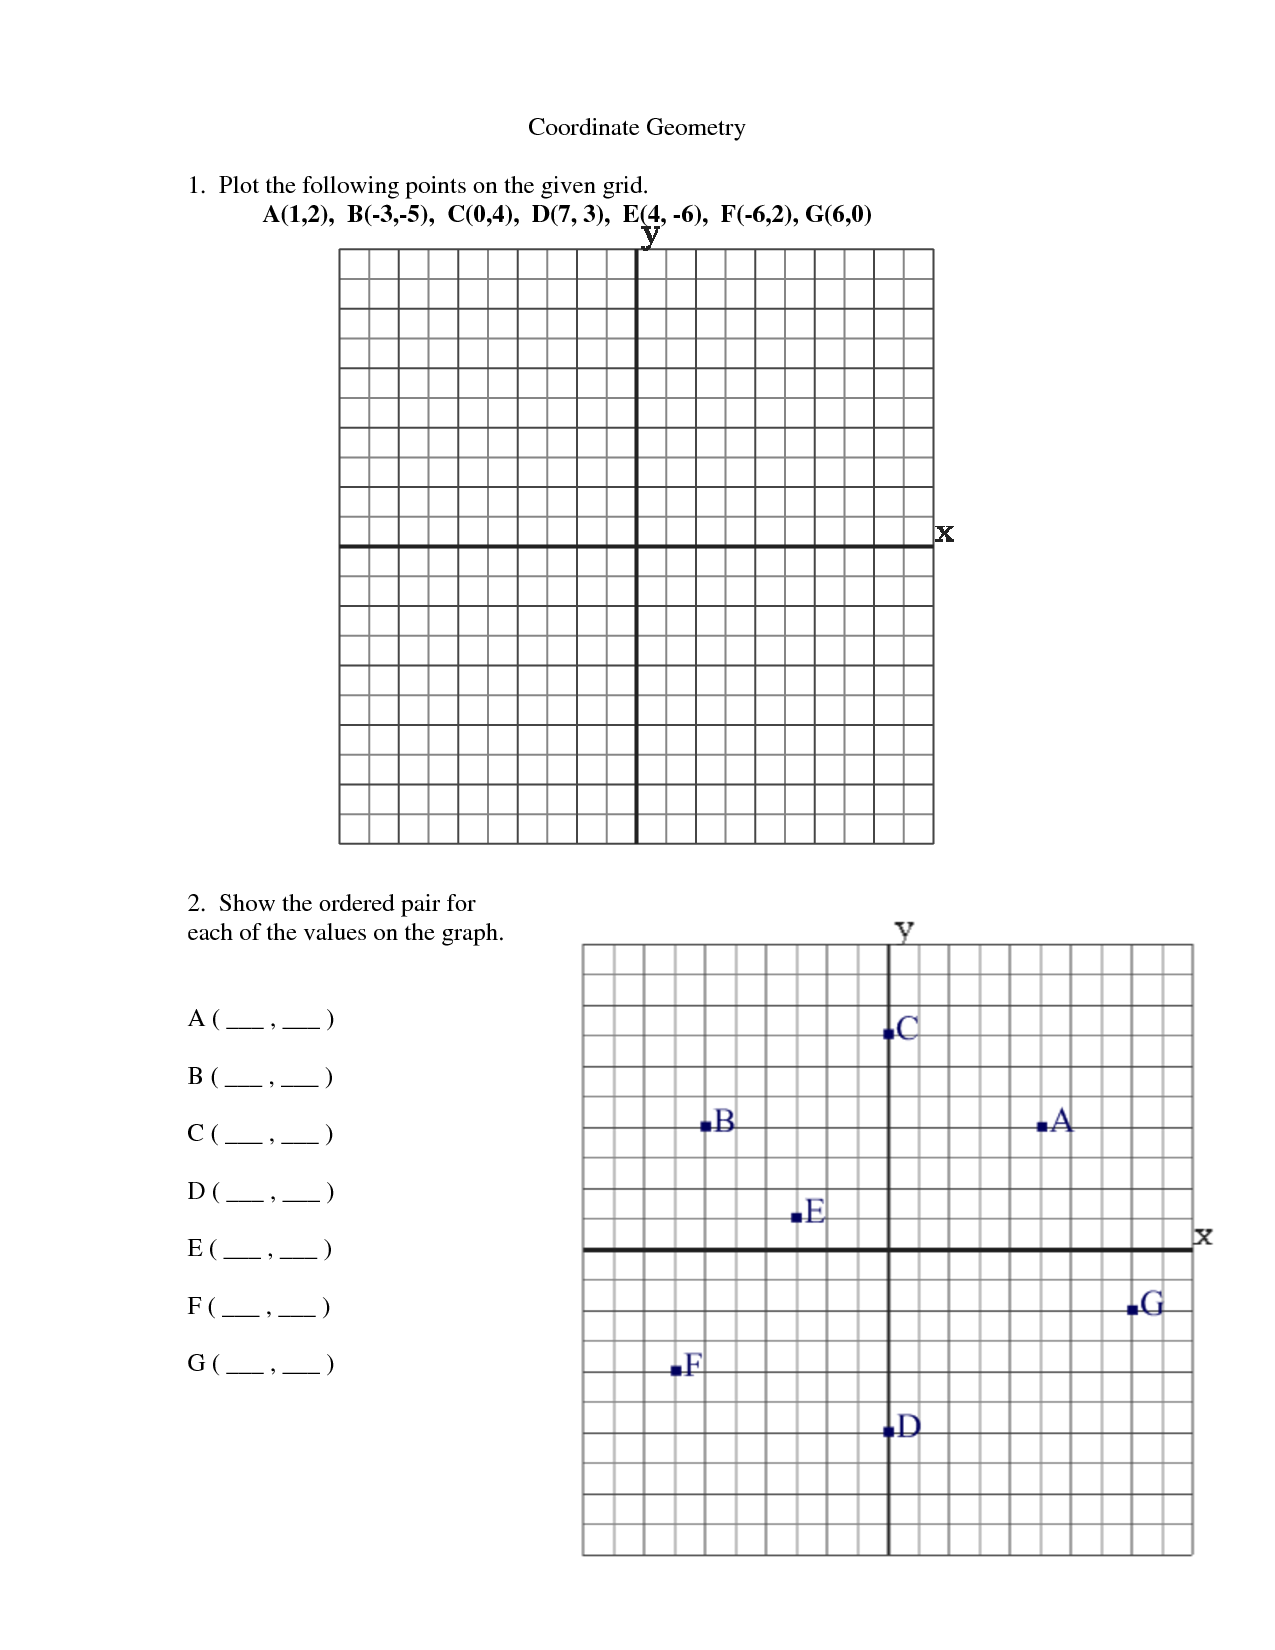 10-hidden-picture-coordinate-graphing-worksheets-worksheeto